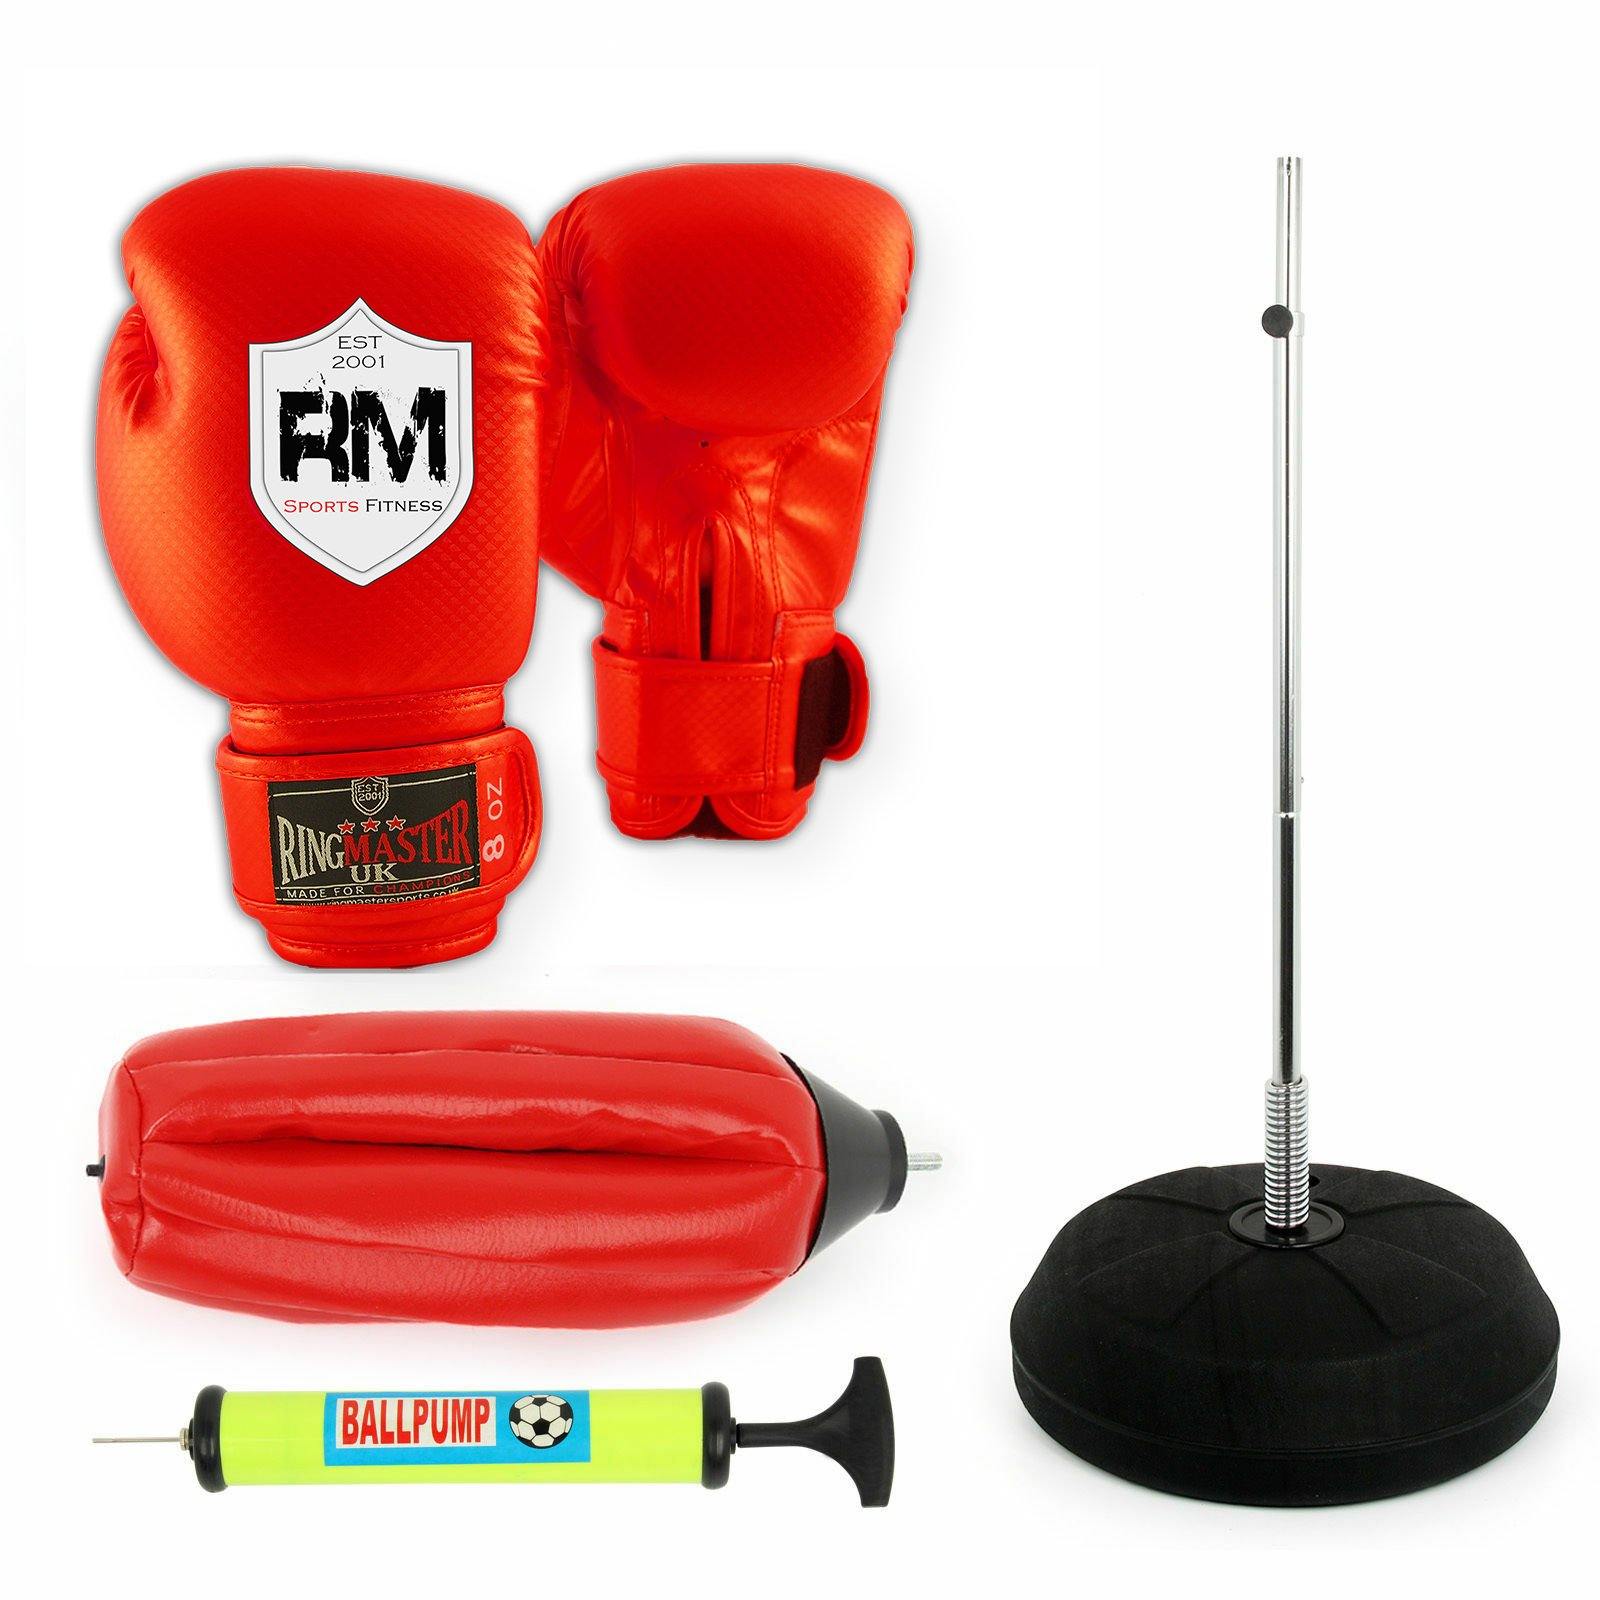 STANDING ADJUSTABLE PUNCH BAG BALL SET INCLUDES RINGMASTER SPORTS GLOVES MITTS BOXING UK NEW - RingMaster Sports